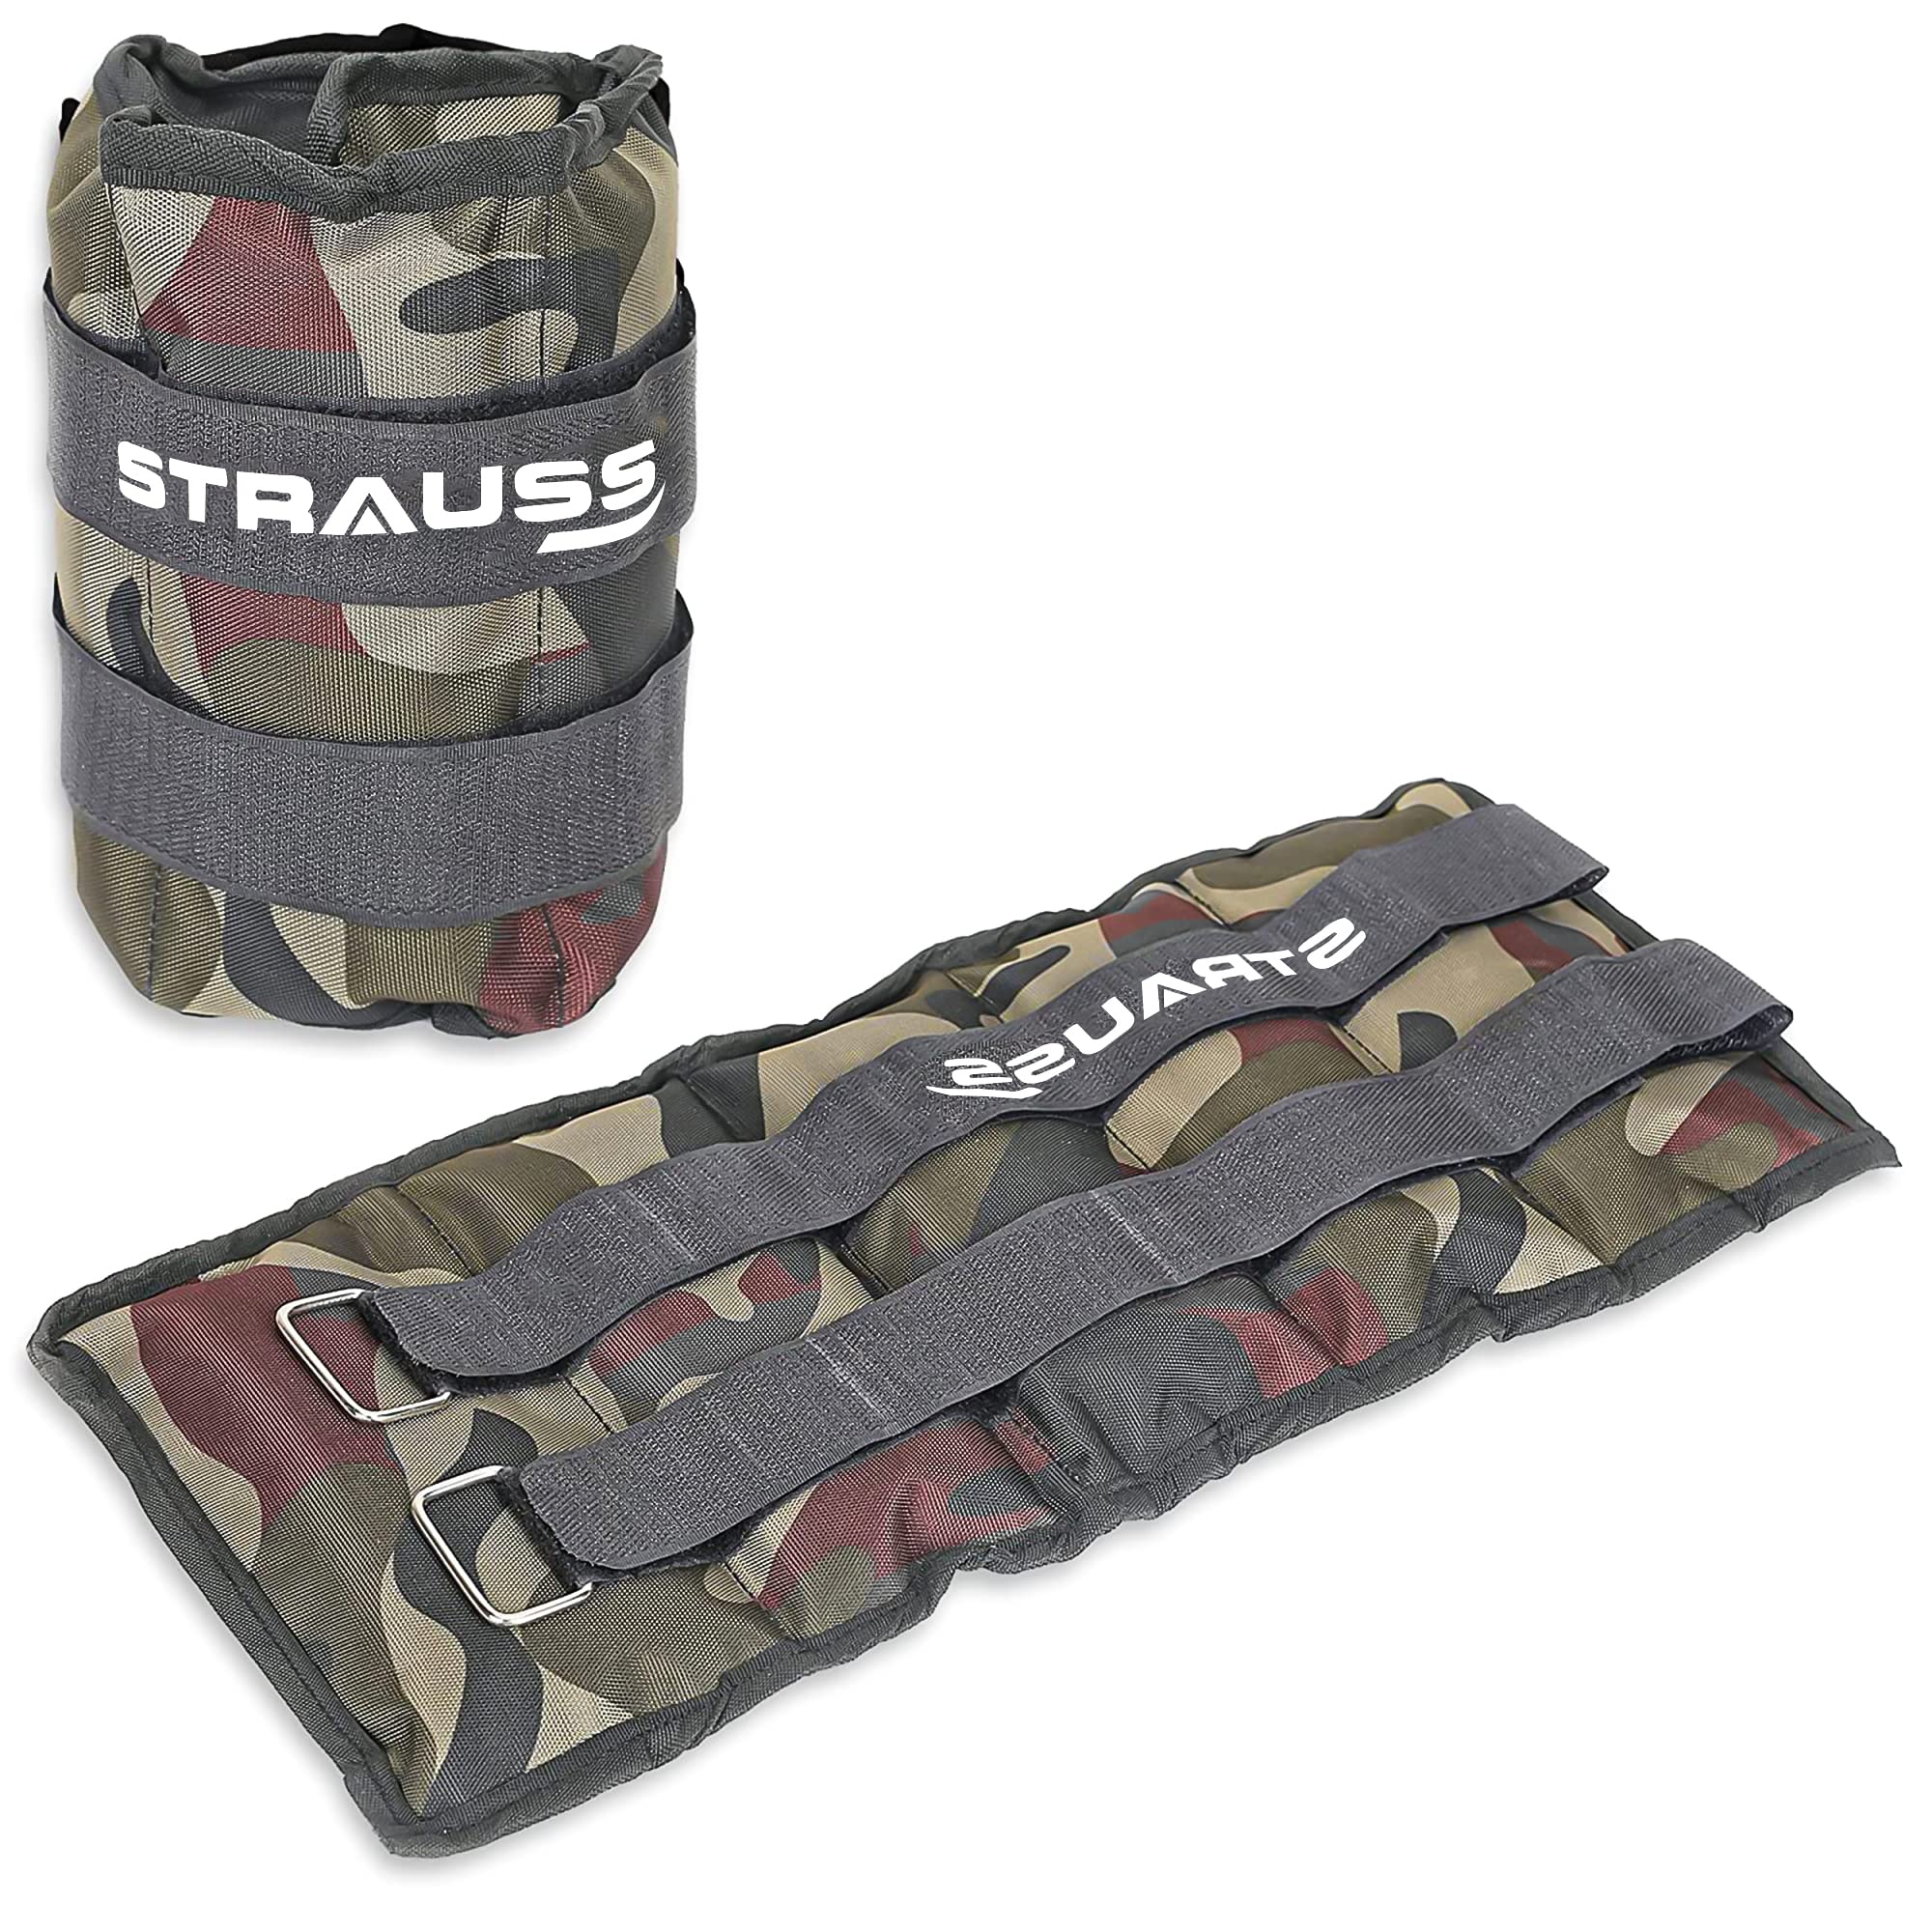 Strauss Adjustable Ankle/Wrist Weights 1.5 KG X 2 | Ideal for Walking, Running, Jogging, Cycling, Gym, Workout & Strength Training | Easy to Use on Ankle, Wrist, Leg, (Camouflage)